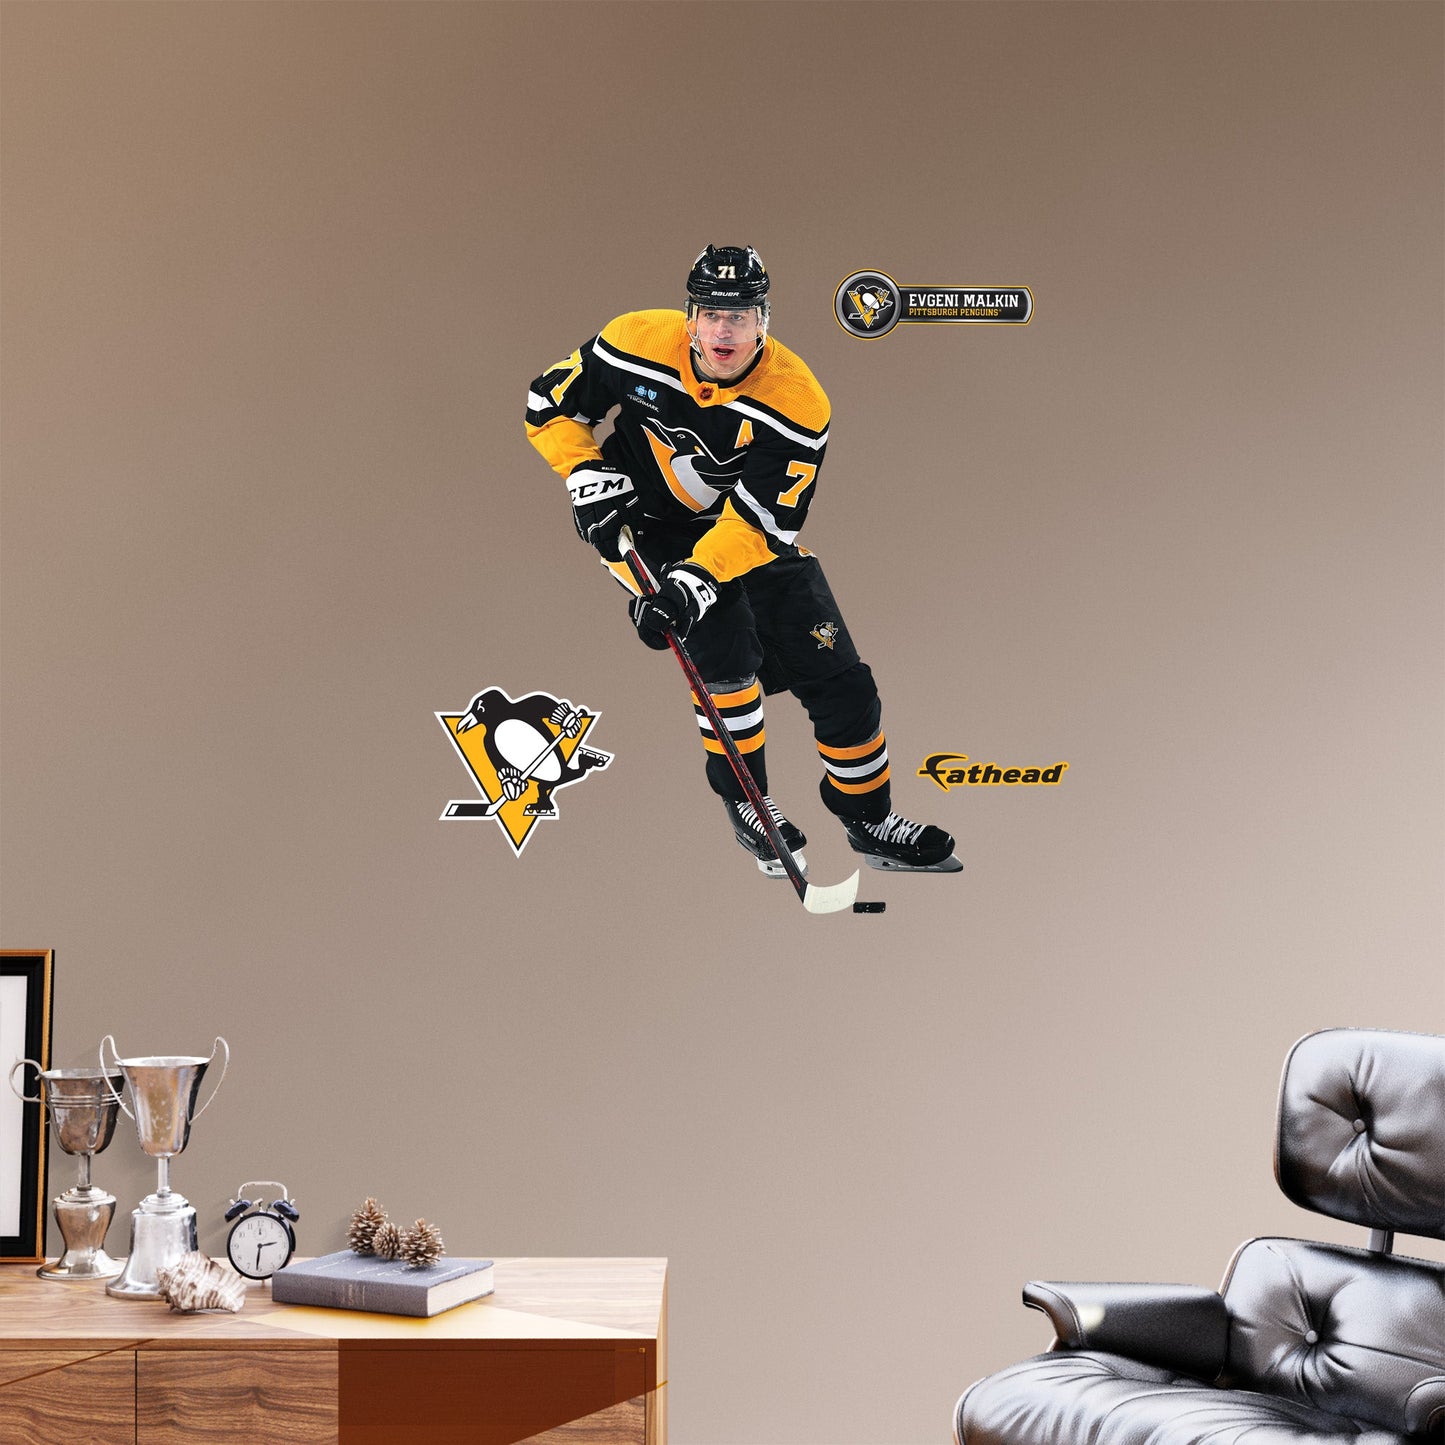 Pittsburgh Penguins: Evgeni Malkin Throwback        - Officially Licensed NHL Removable     Adhesive Decal